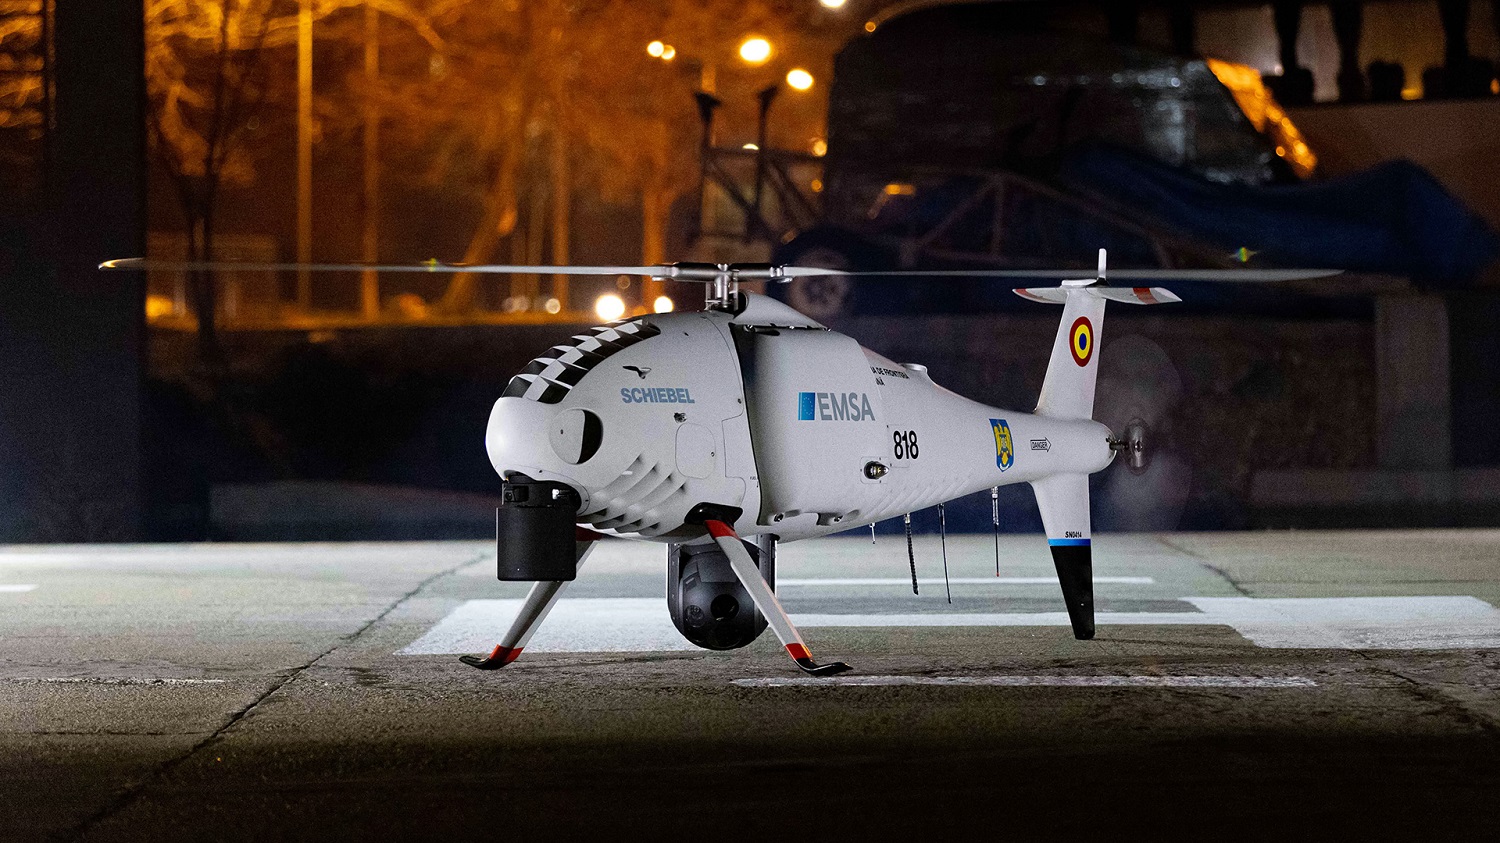 EMSA Awards Schiebel Group Contract to Support Spanish Maritime Safety Agency CAMCOPTER S-100